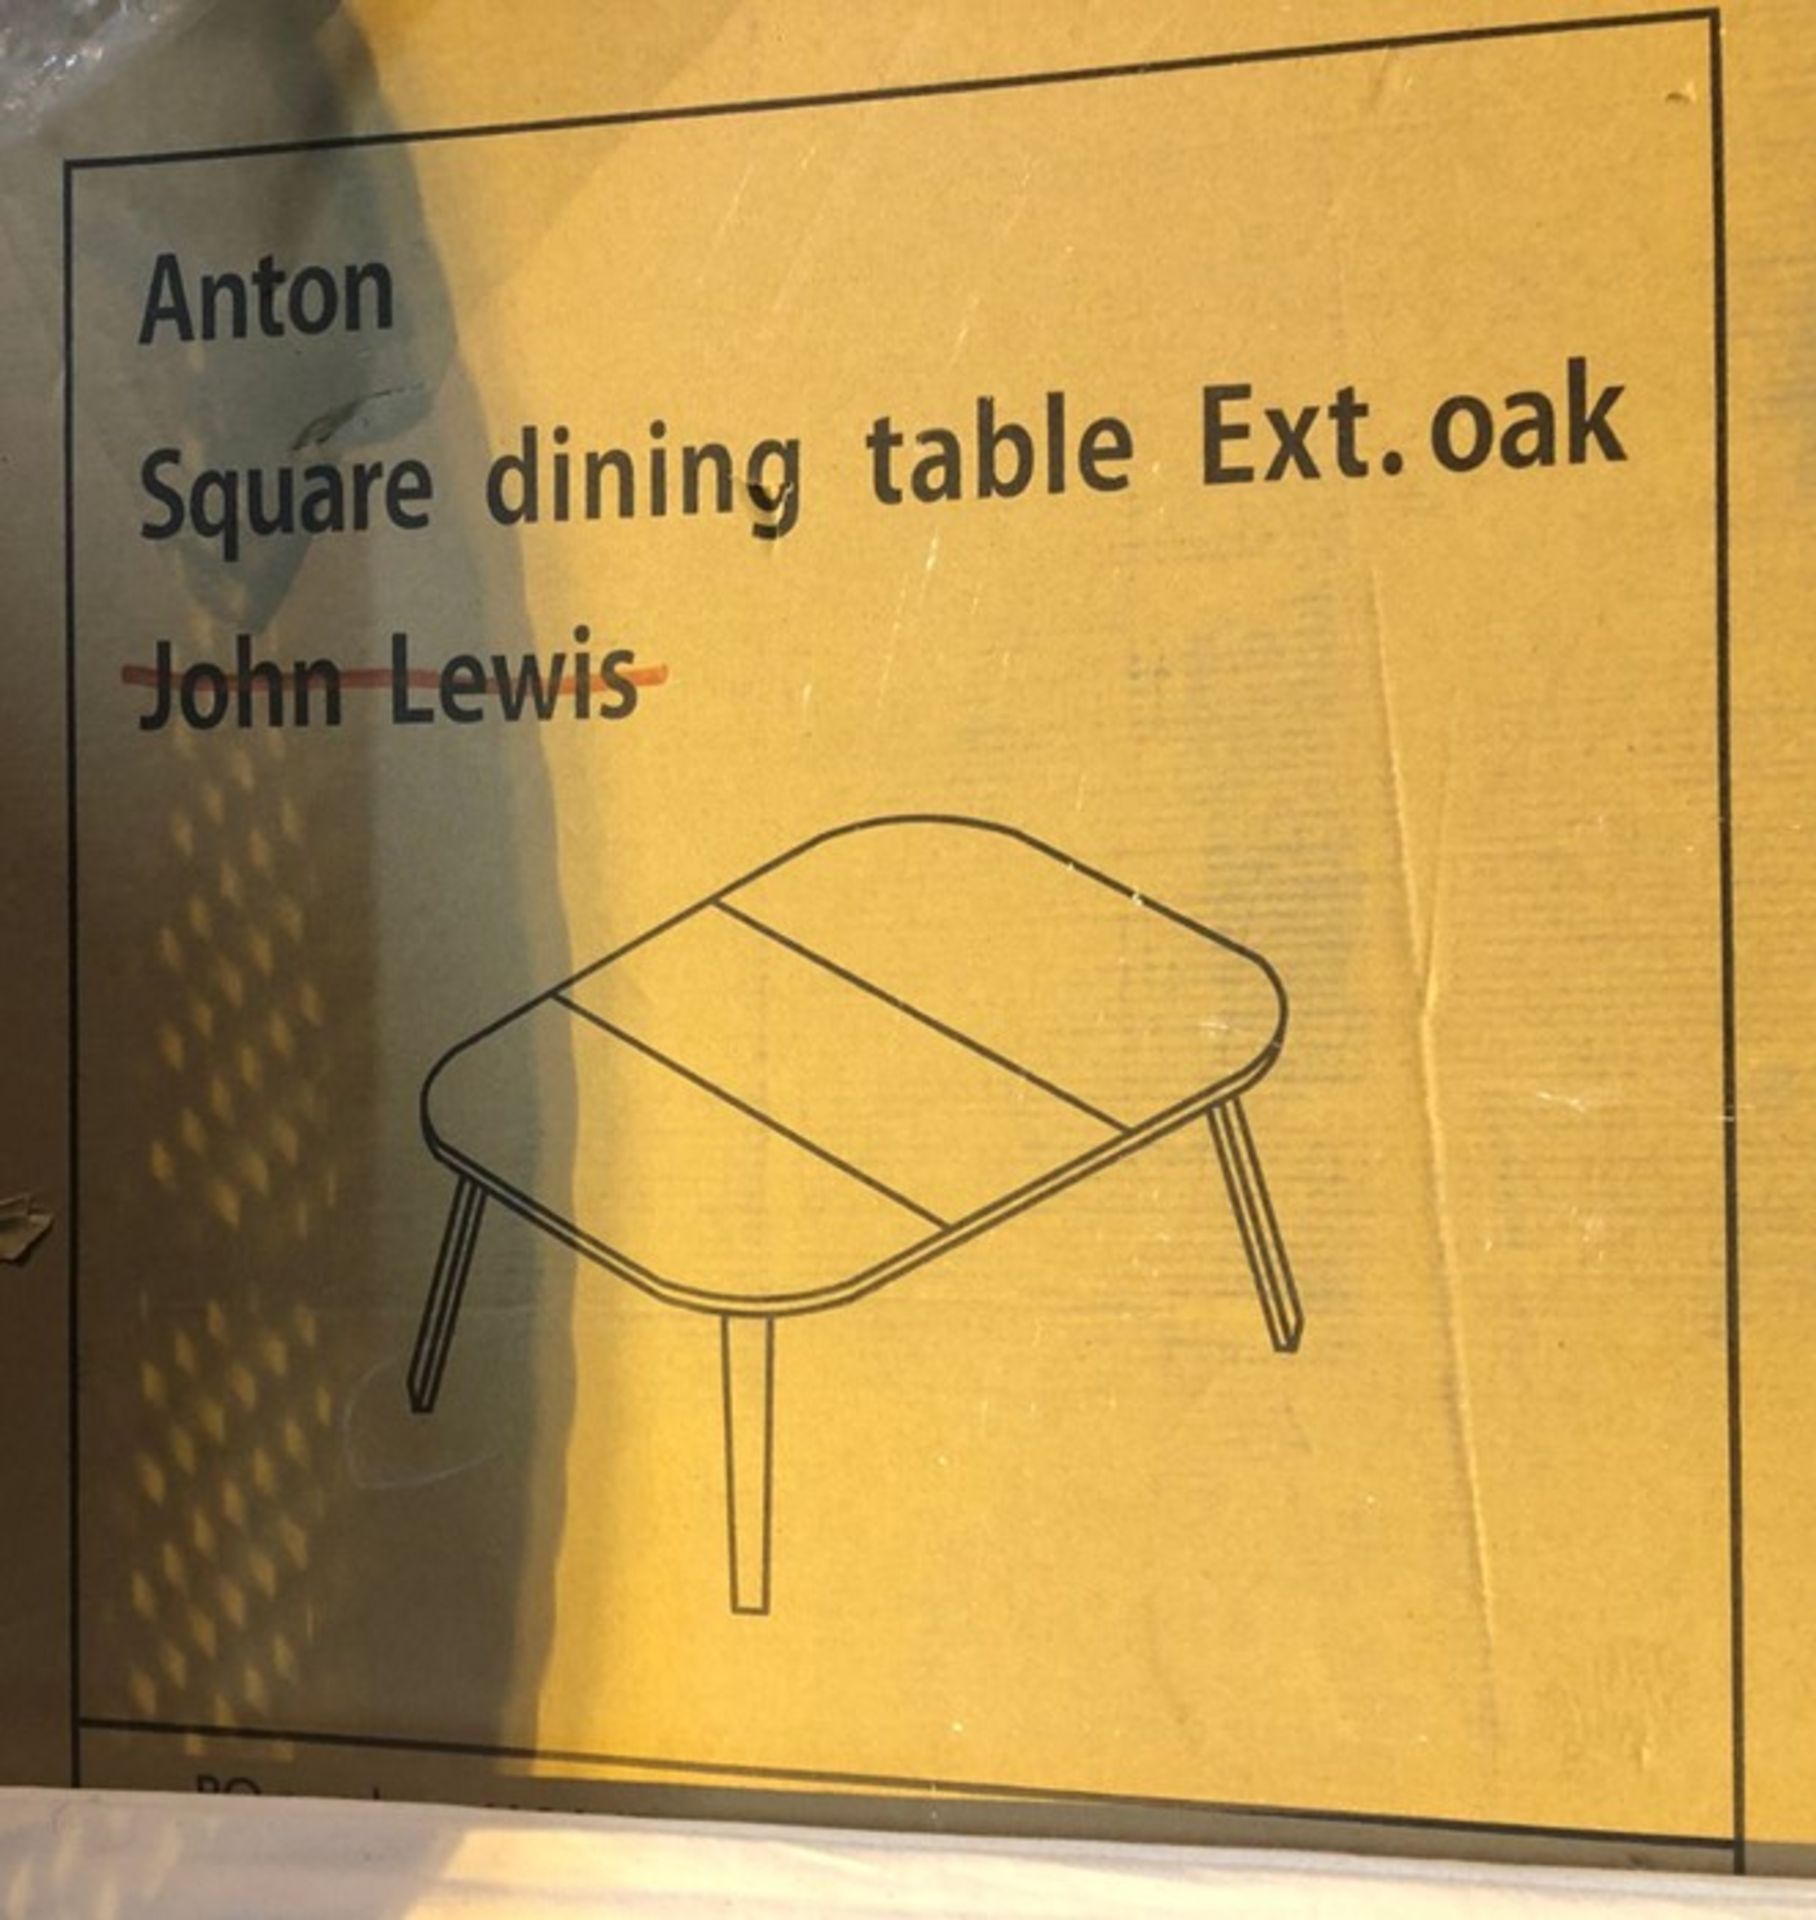 HOUSE BY JOHN LEWIS ANTON 4-6 SEATER EXTENDING DINING TABLE